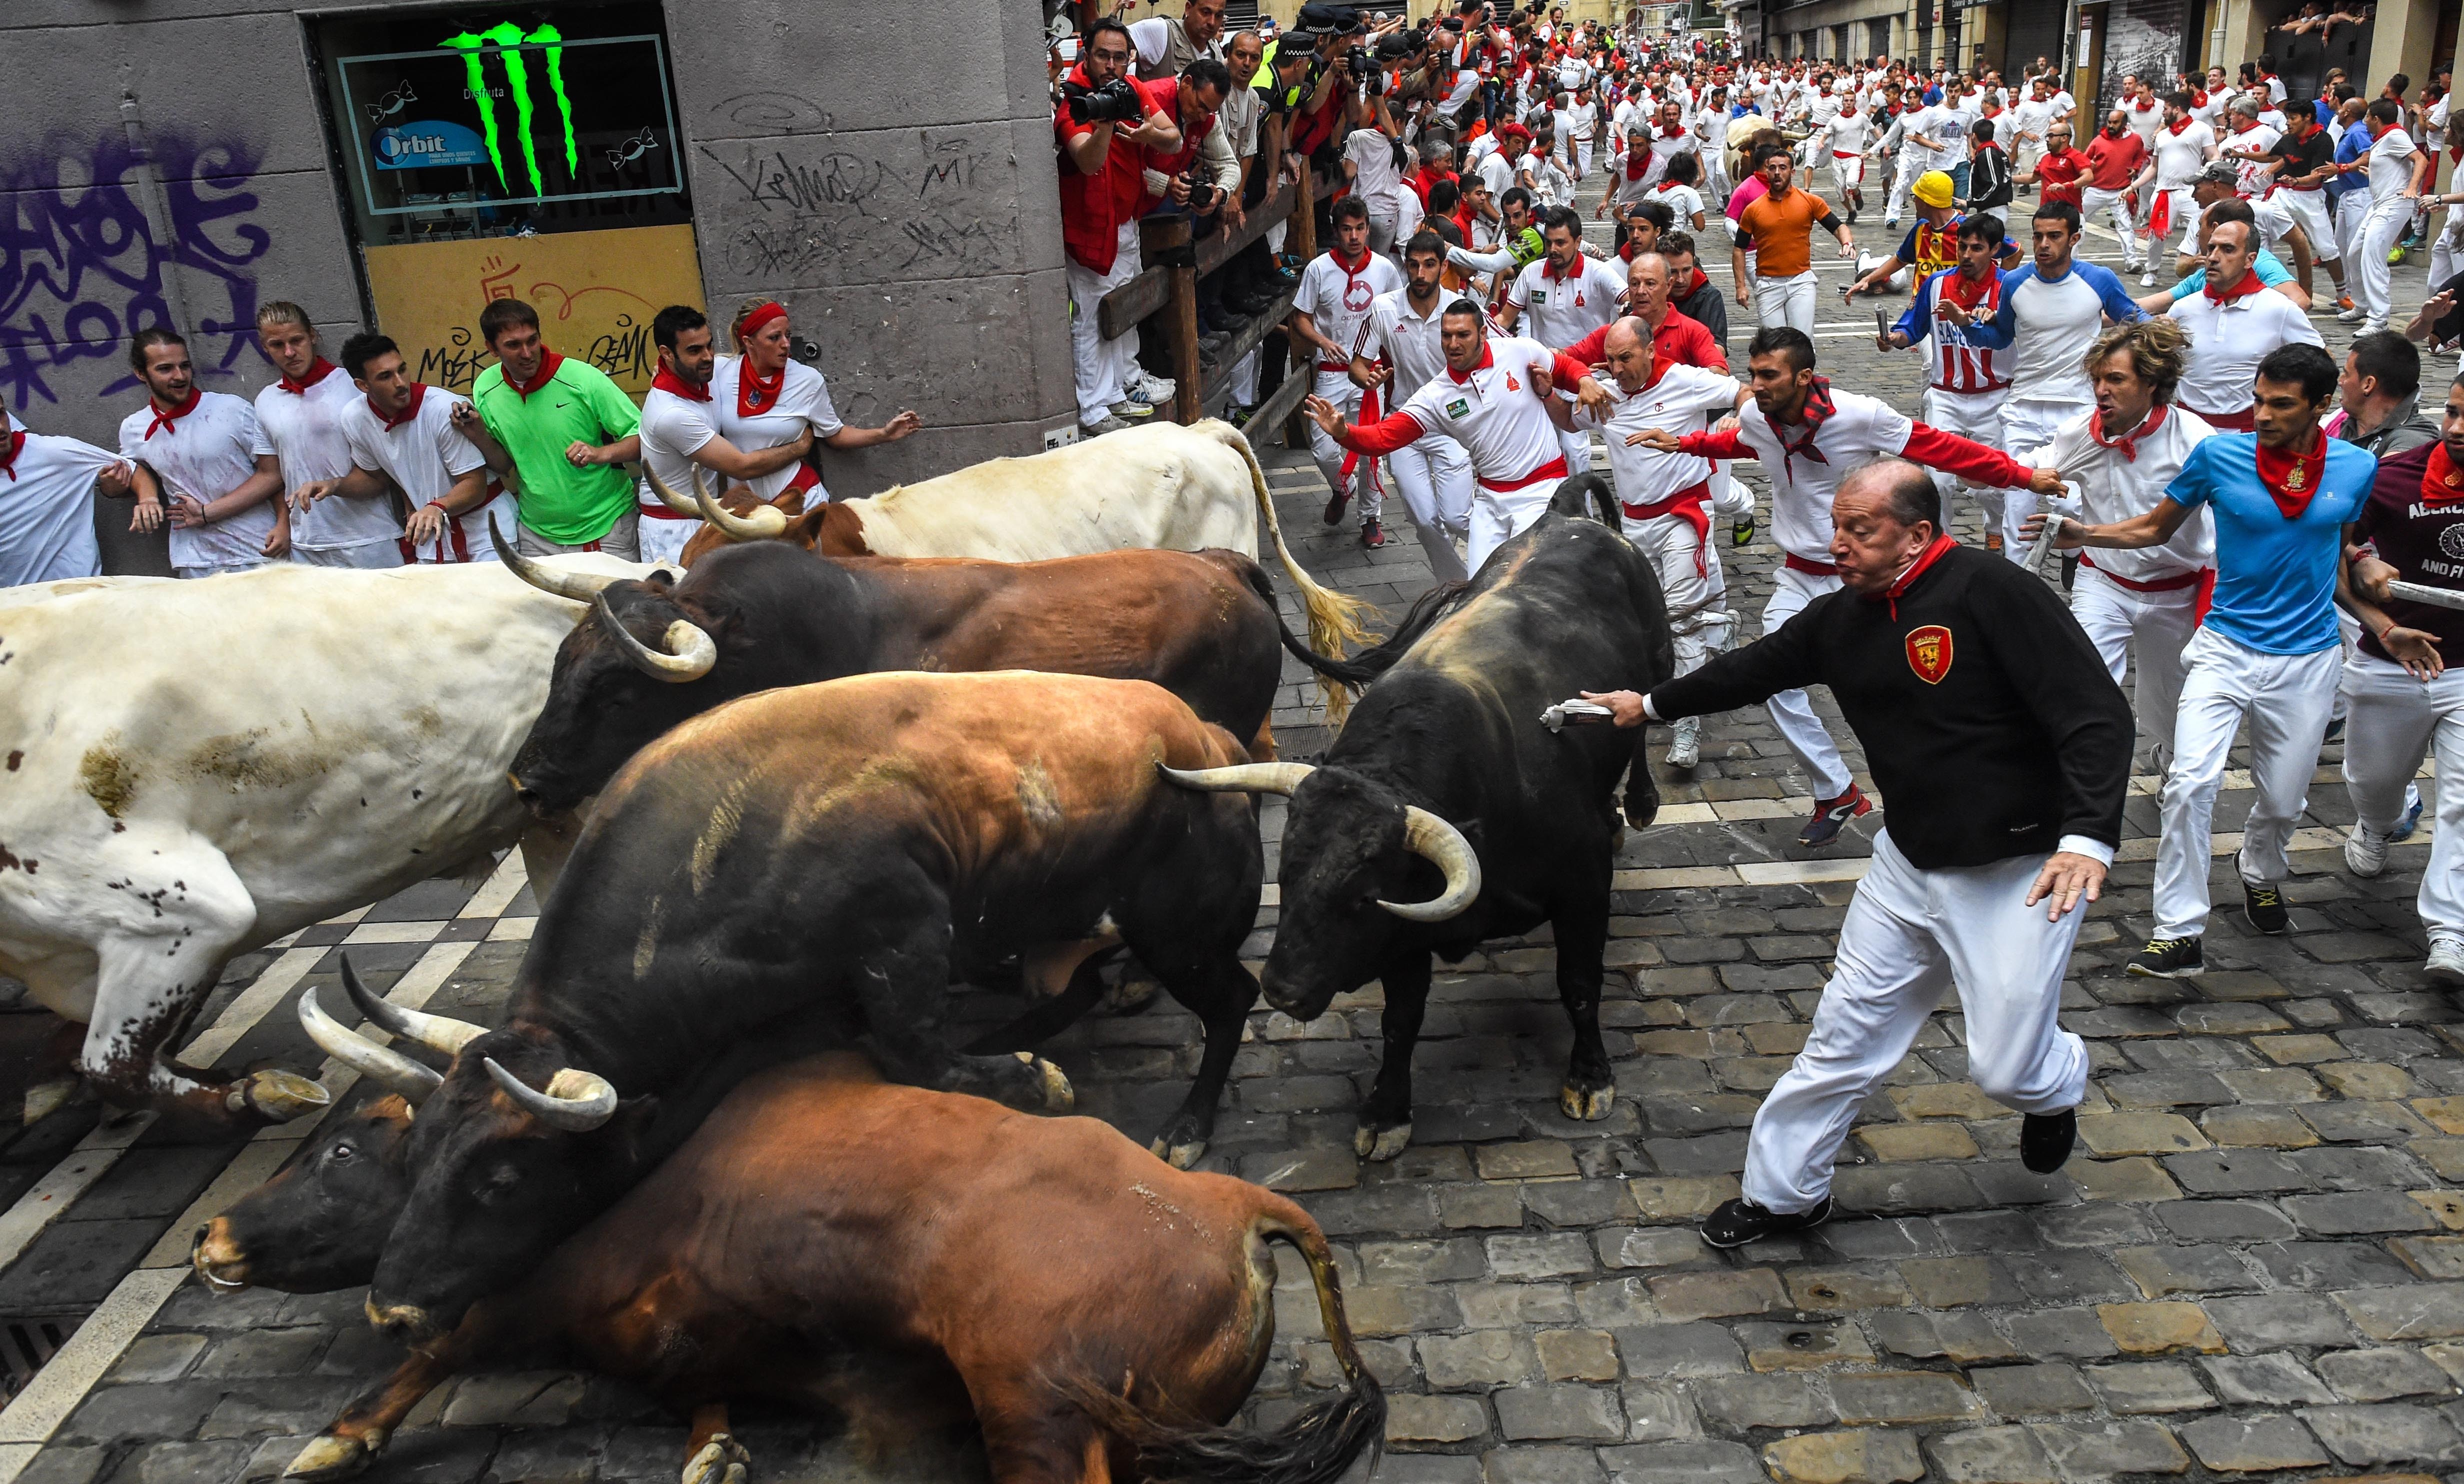 People Aren't The Only Ones Getting Hurt At The Running Of The Bulls